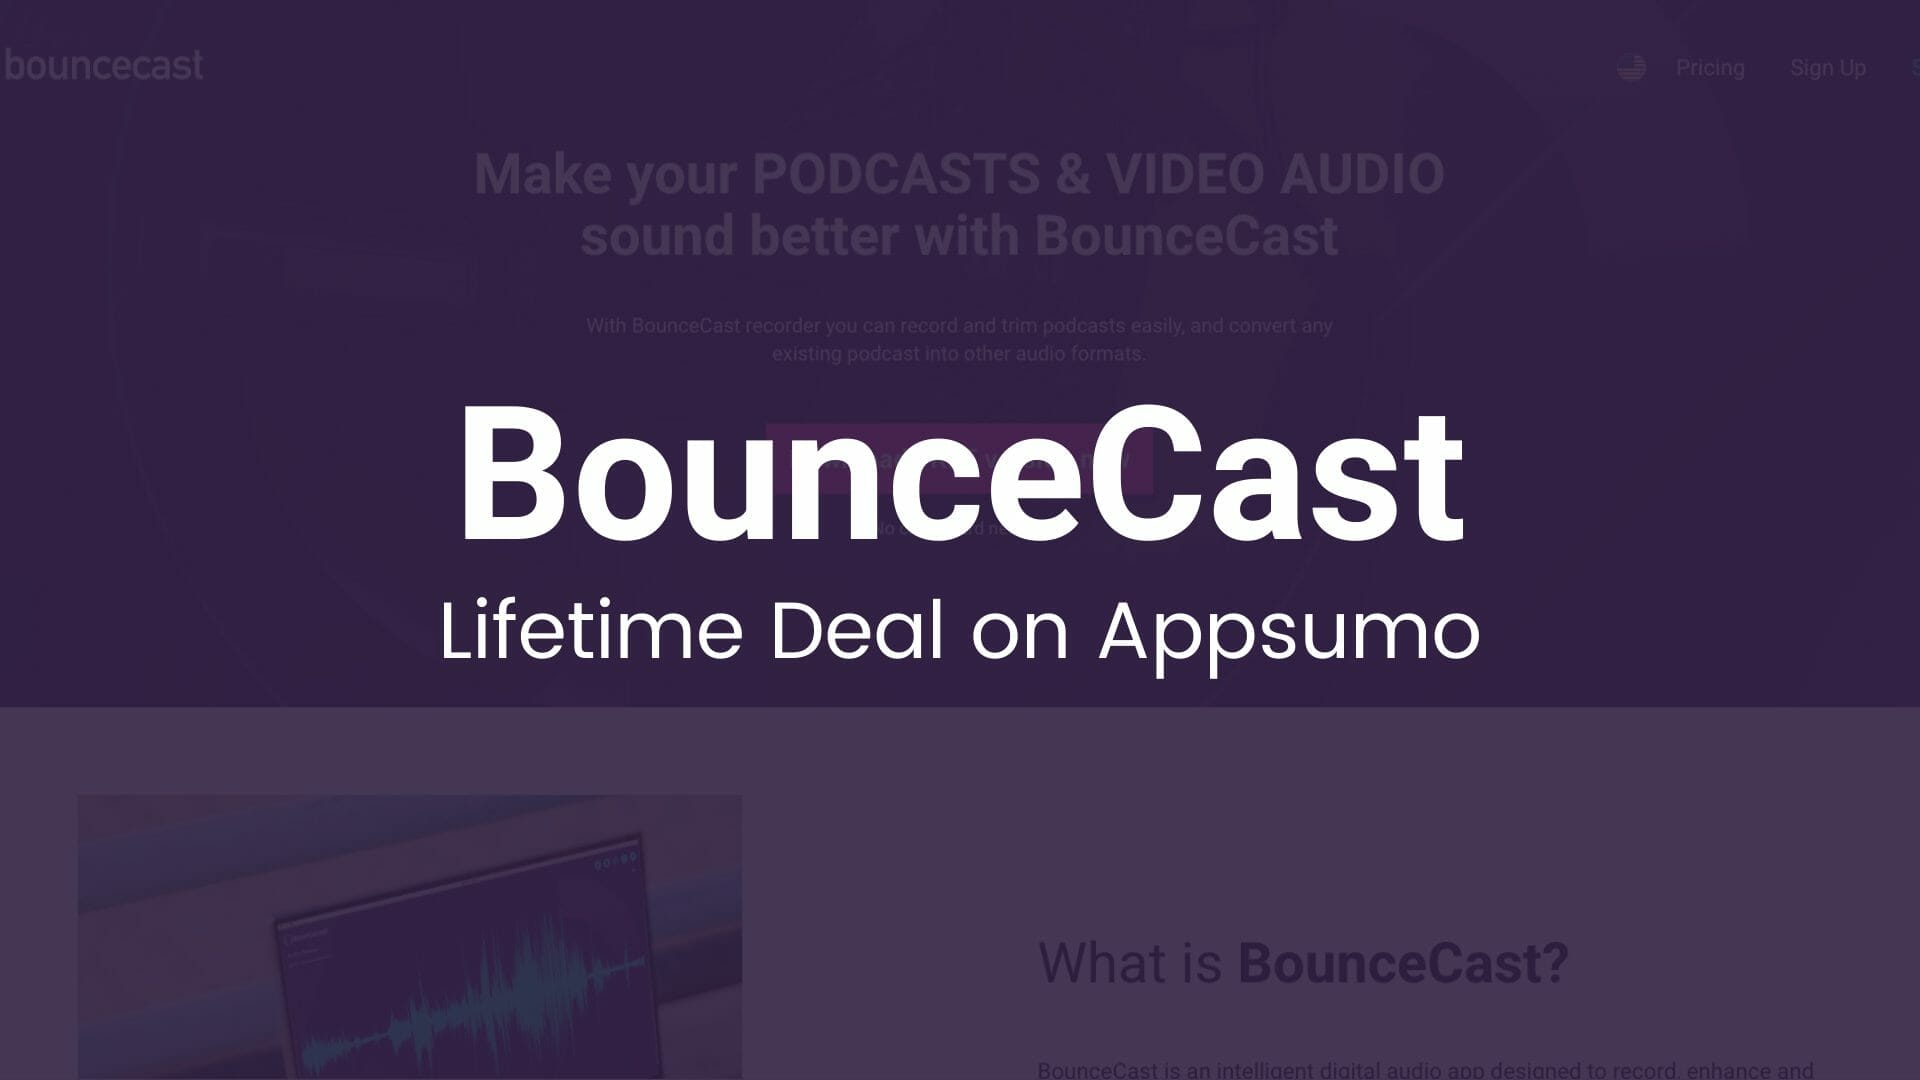 BounceCast: Intelligent Audio App for Creating Your Podcasts